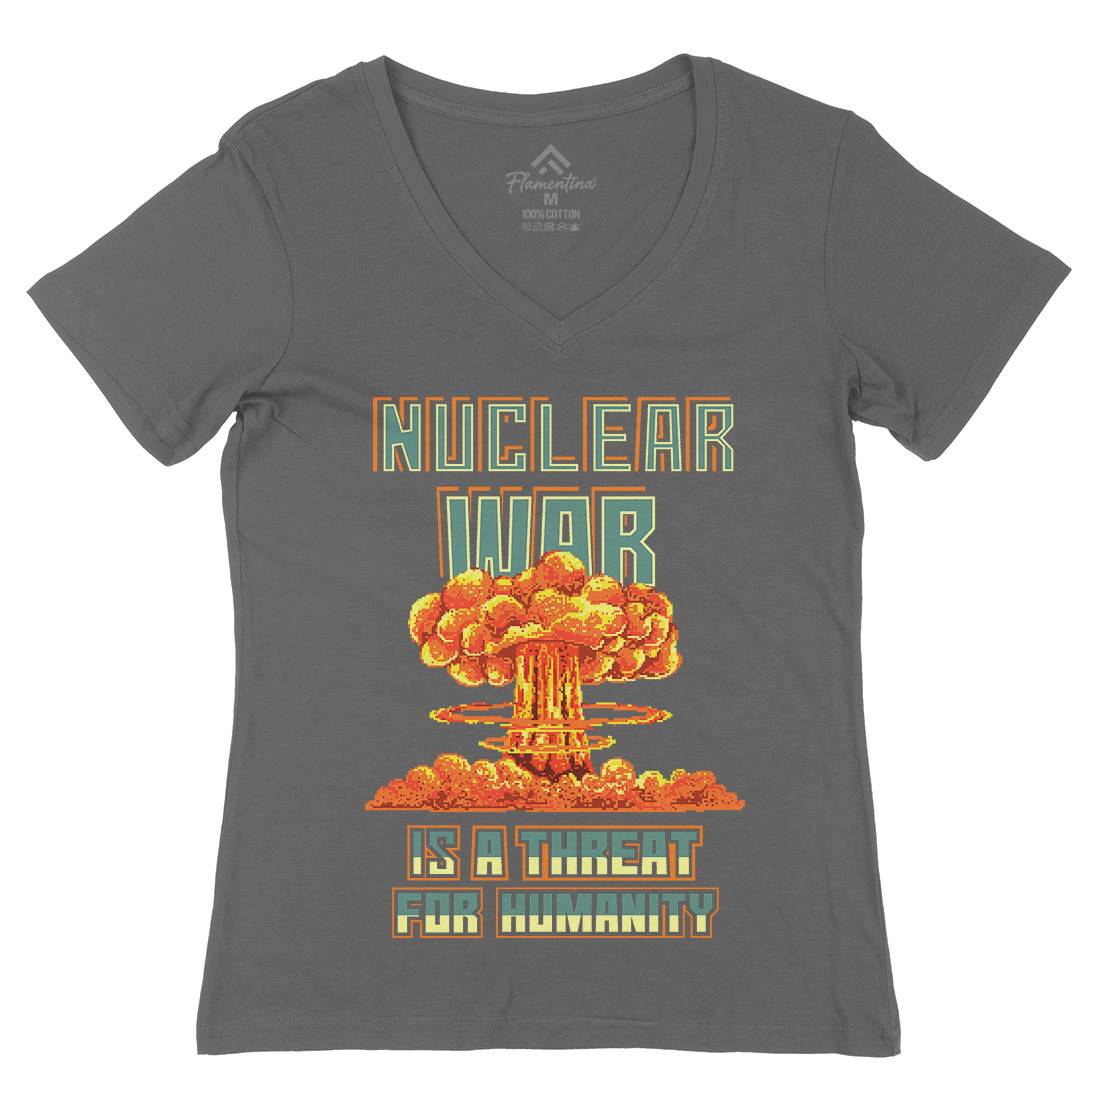 Nuclear War Is A Threat For Humanity Womens Organic V-Neck T-Shirt Army B941